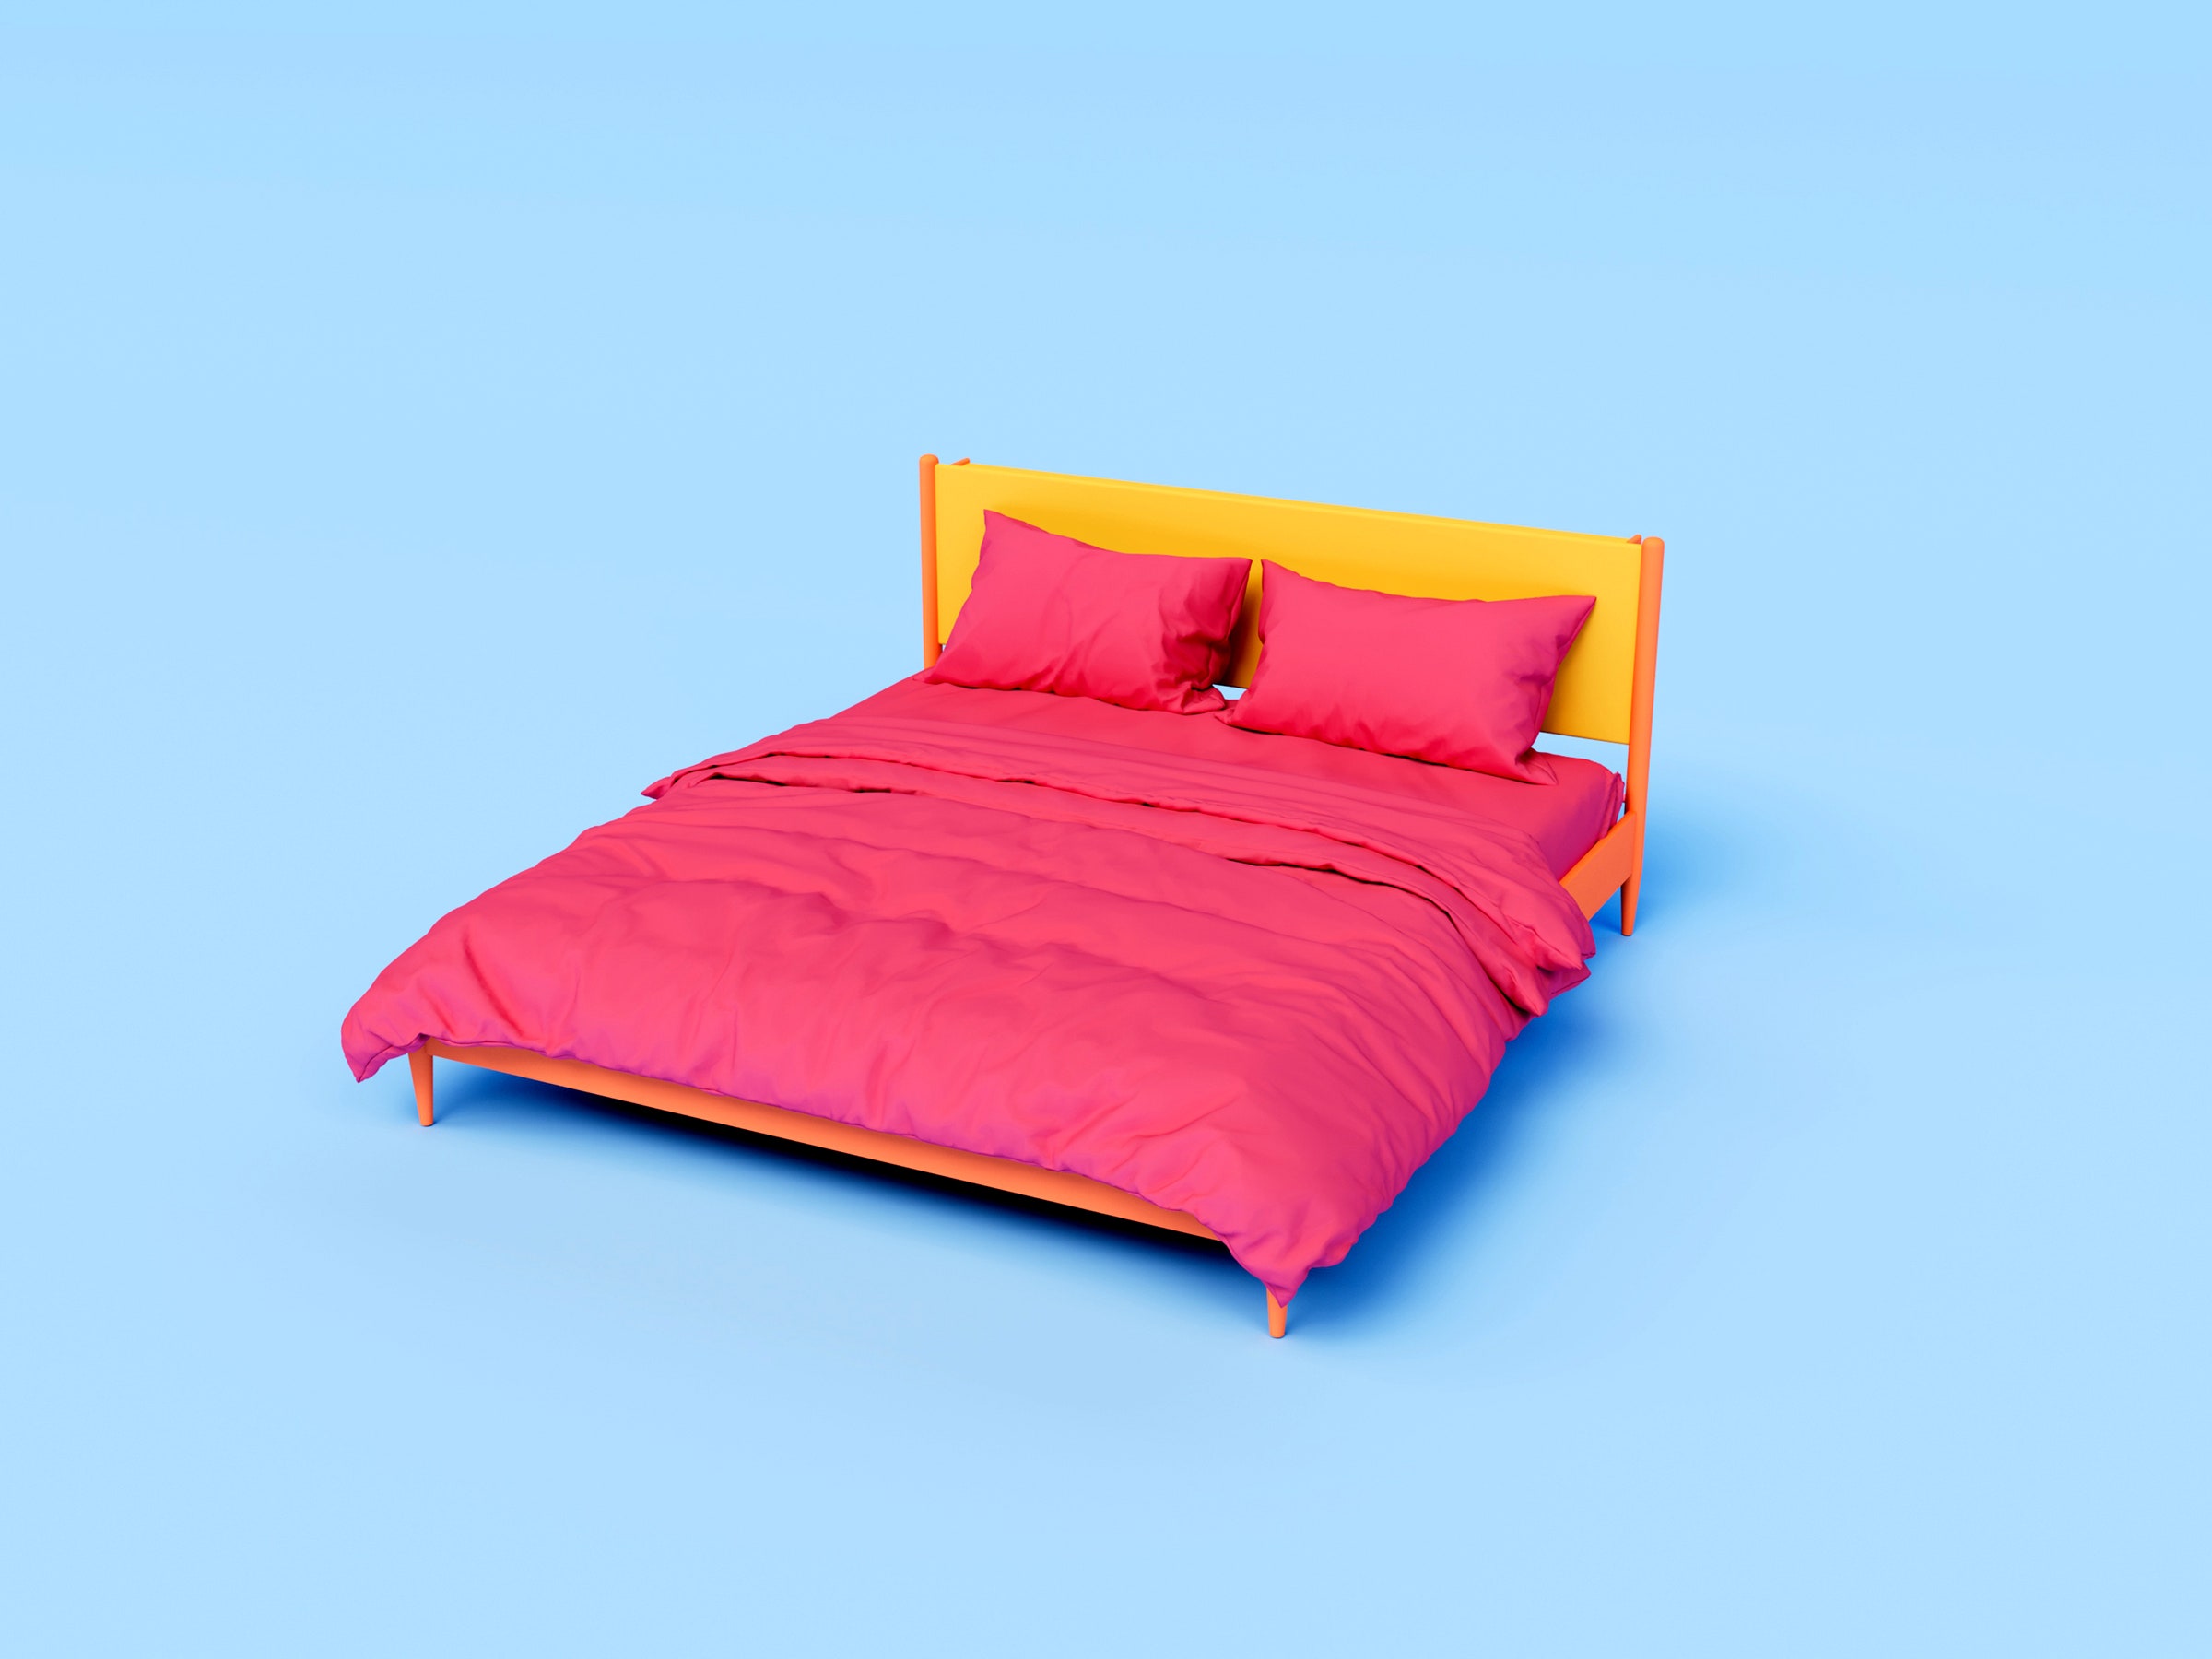 Bed with red sheets on a blue backdrop